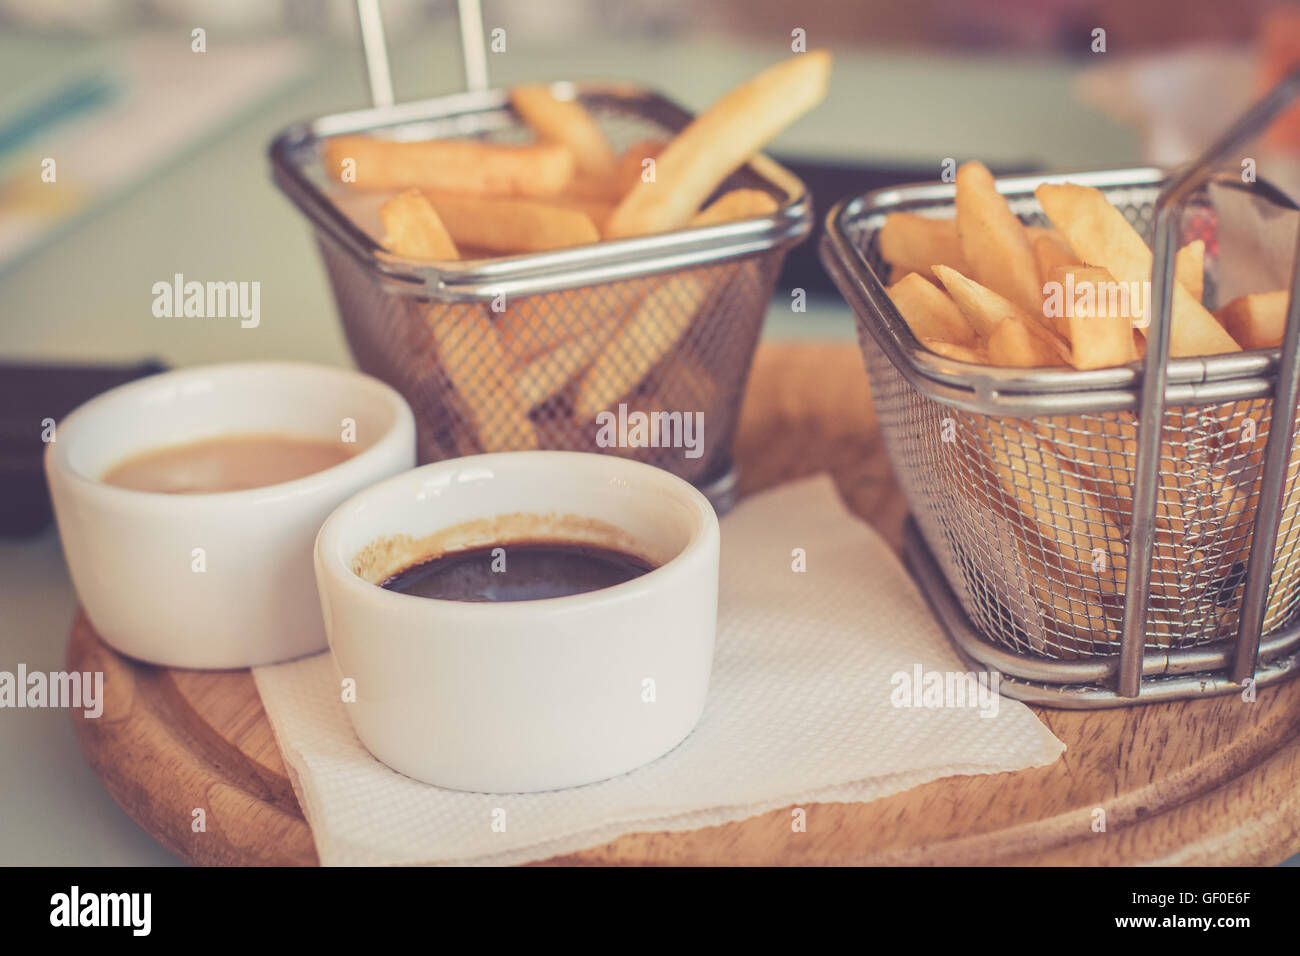 French fries with sauces served on round wooden board. Toned image Stock Photo